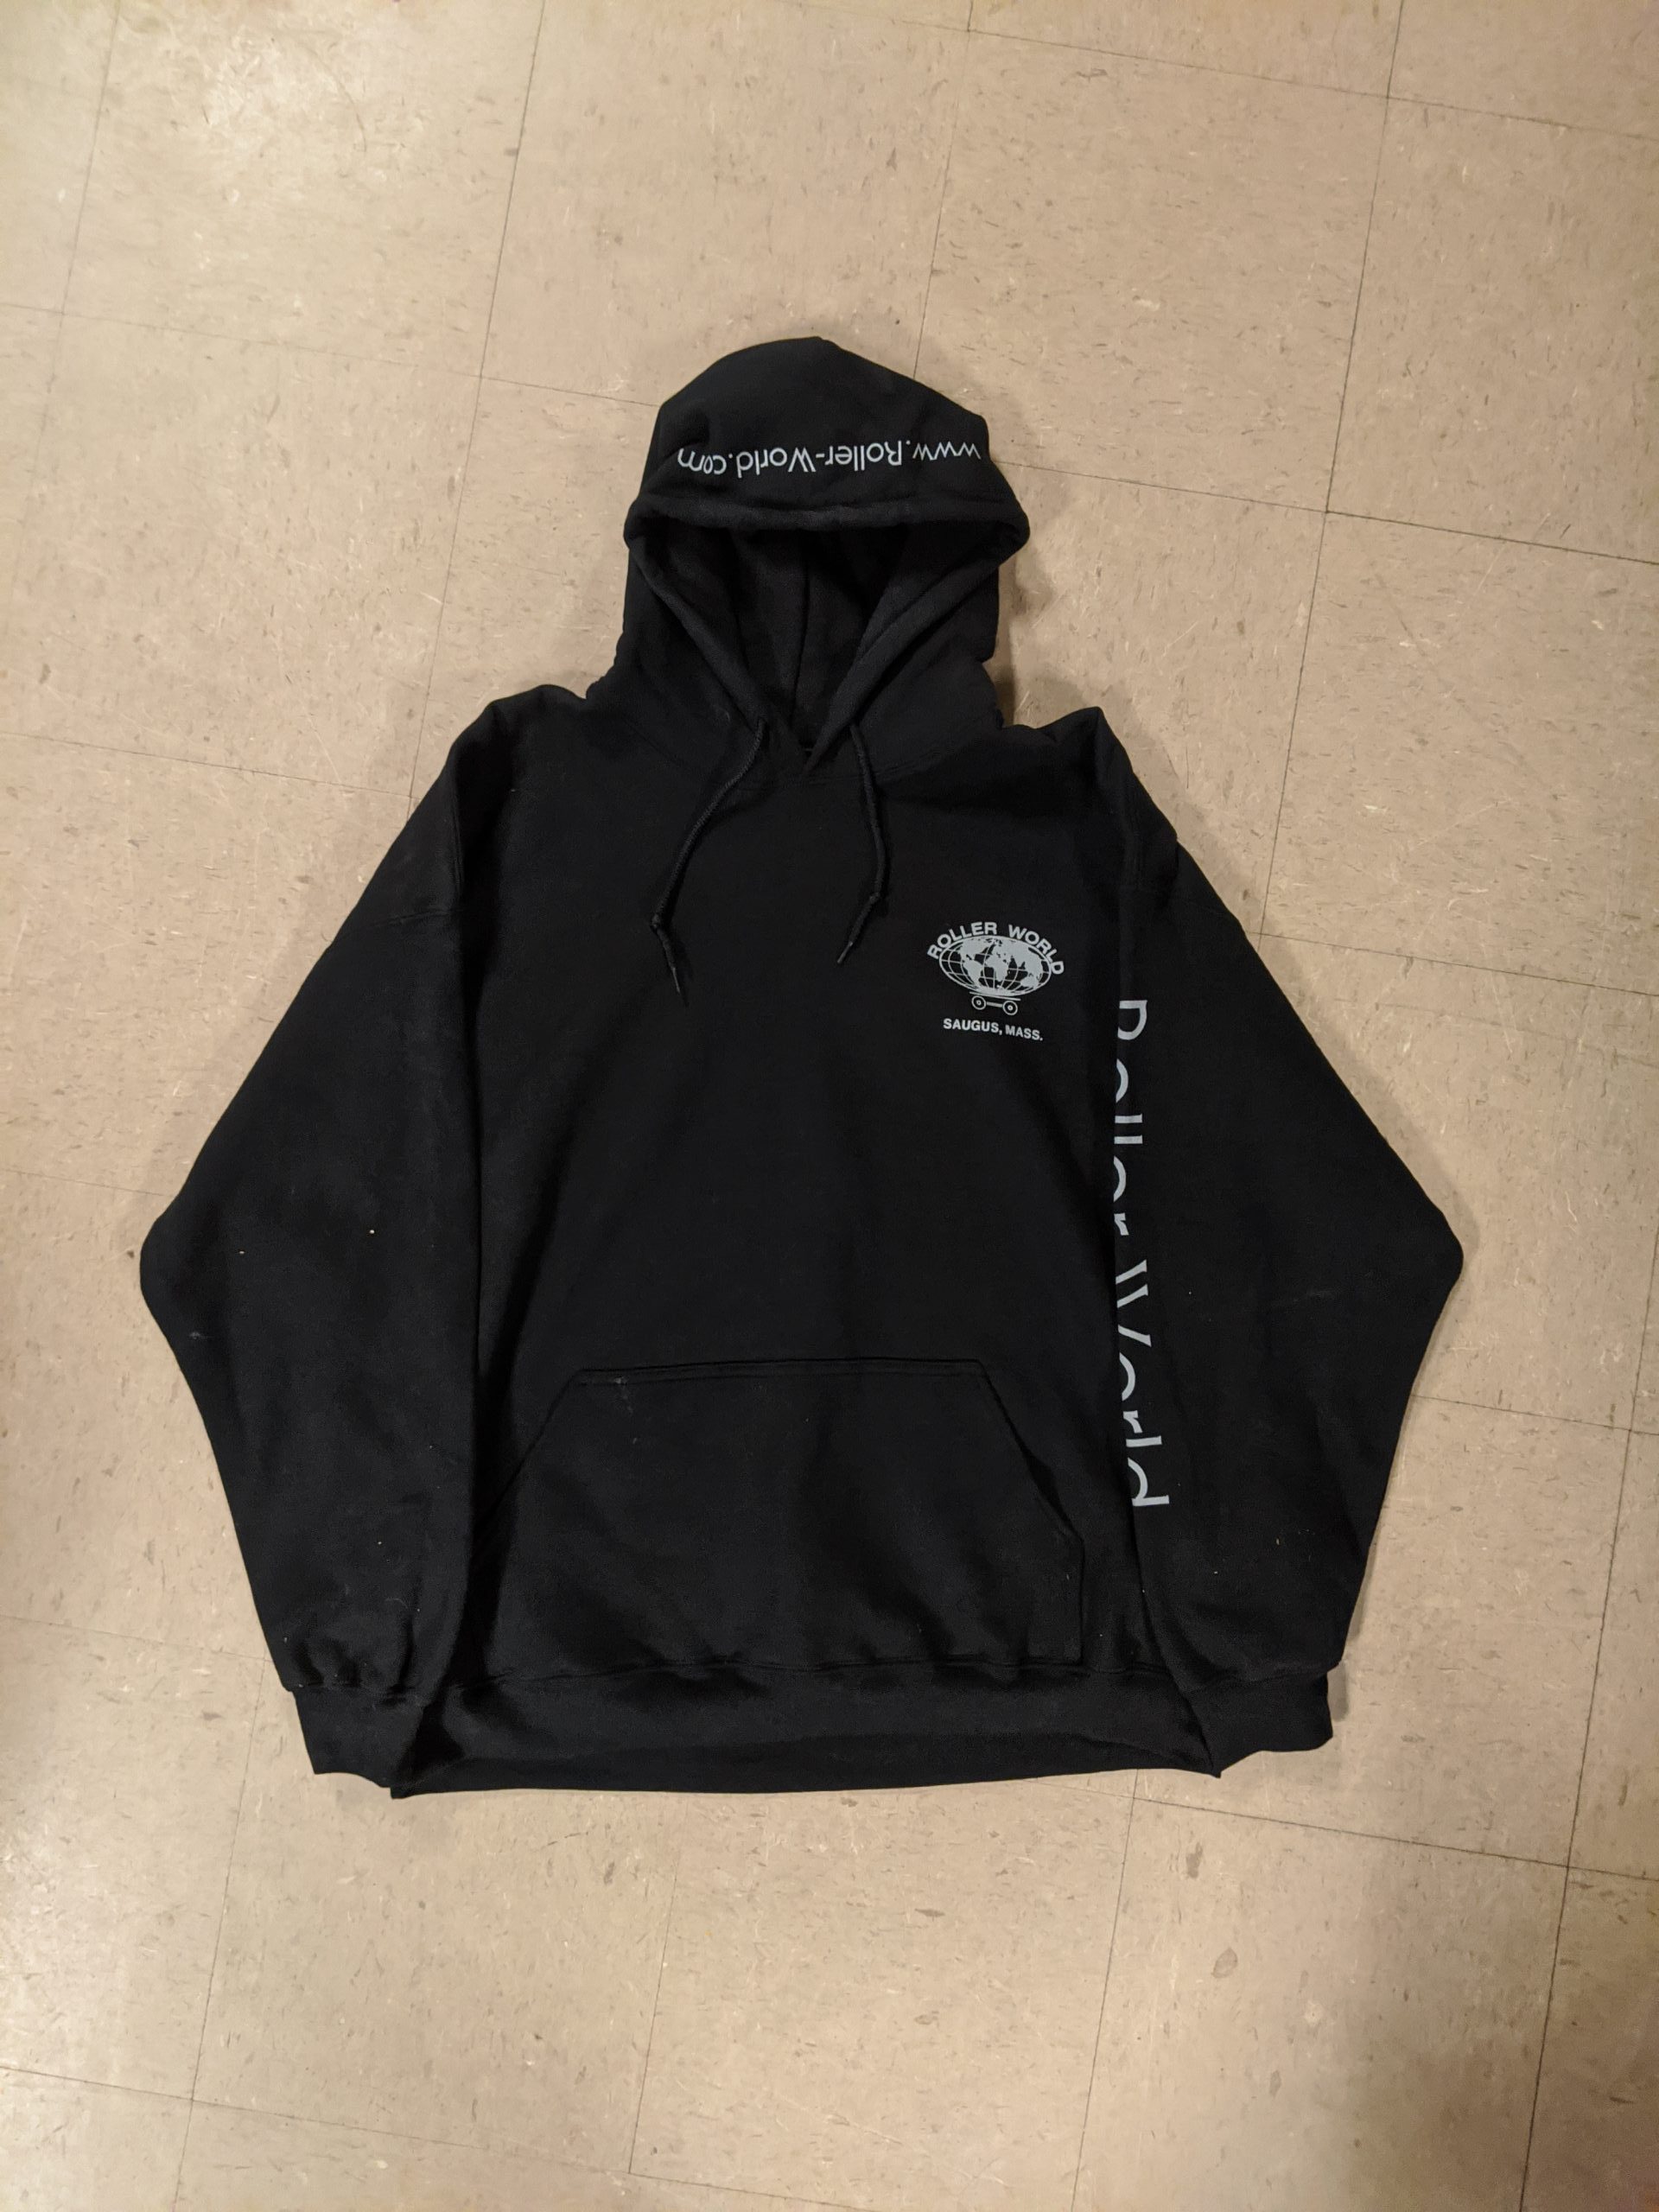 Limited Edition Roller World Hoodie – Roller World, Inc.